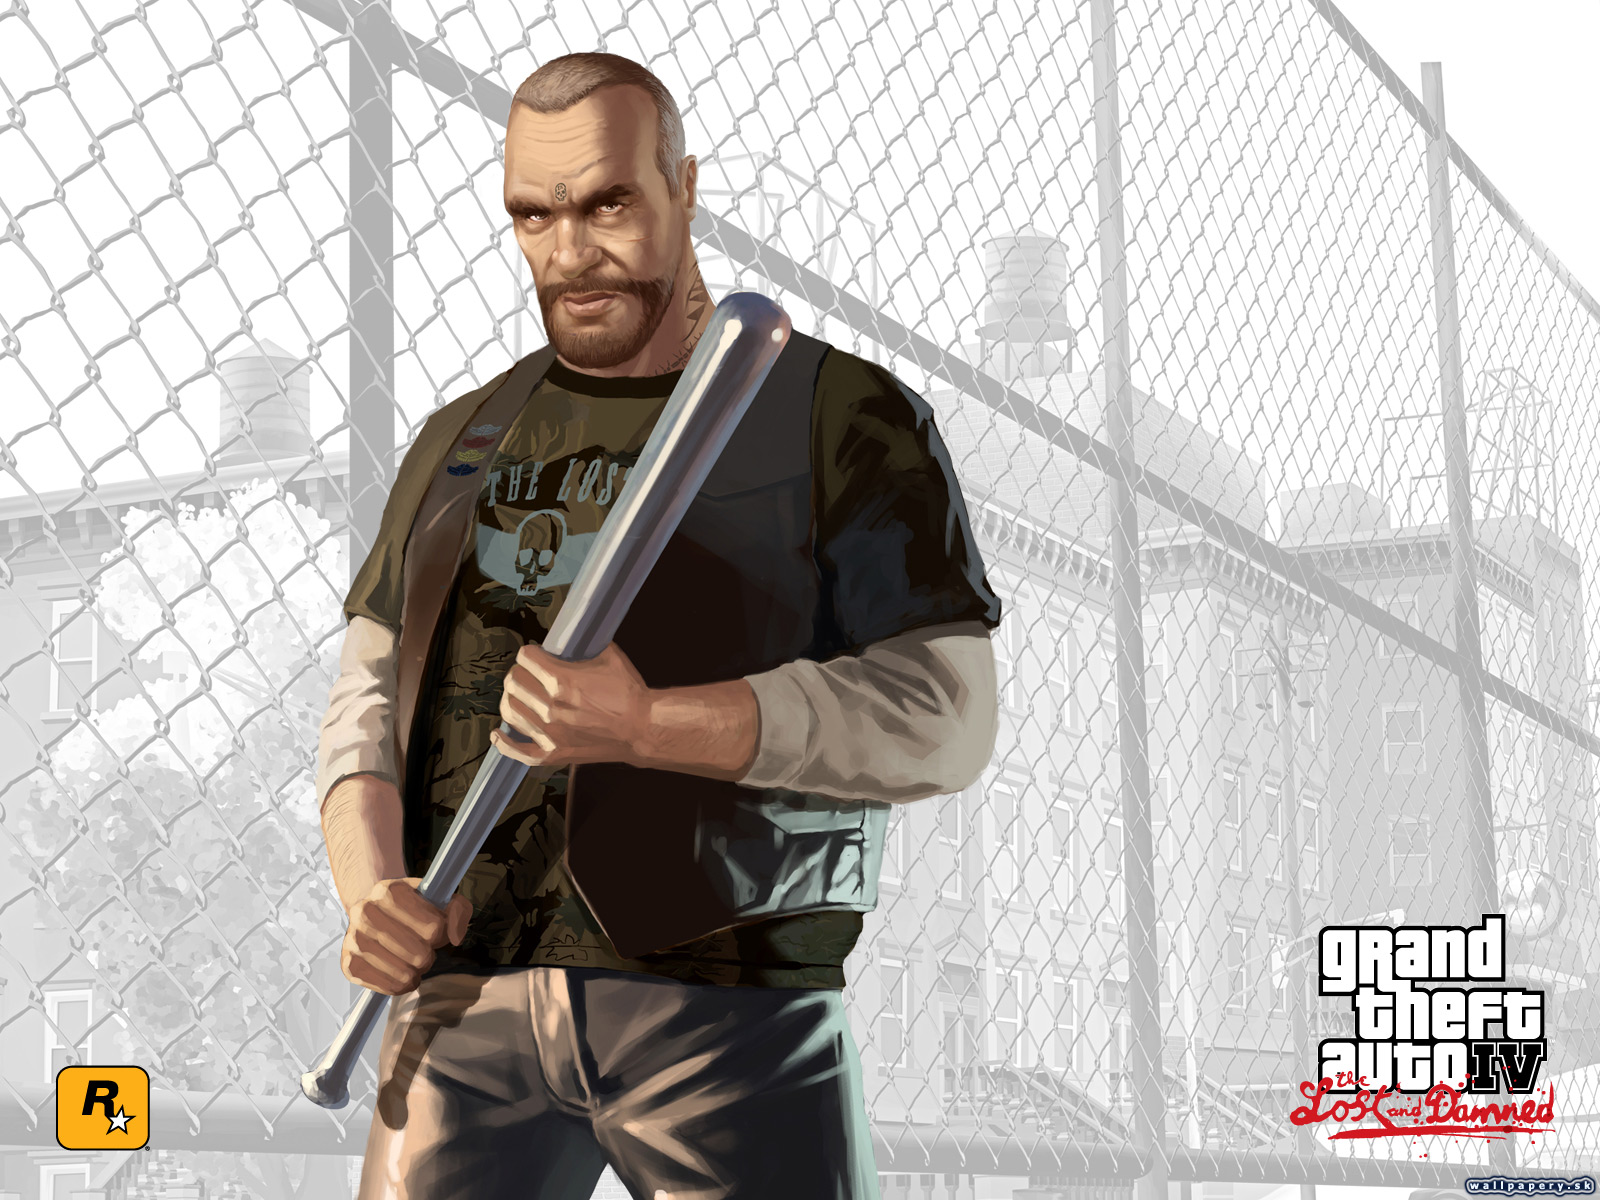 Grand Theft Auto IV: The Lost and Damned - wallpaper 2